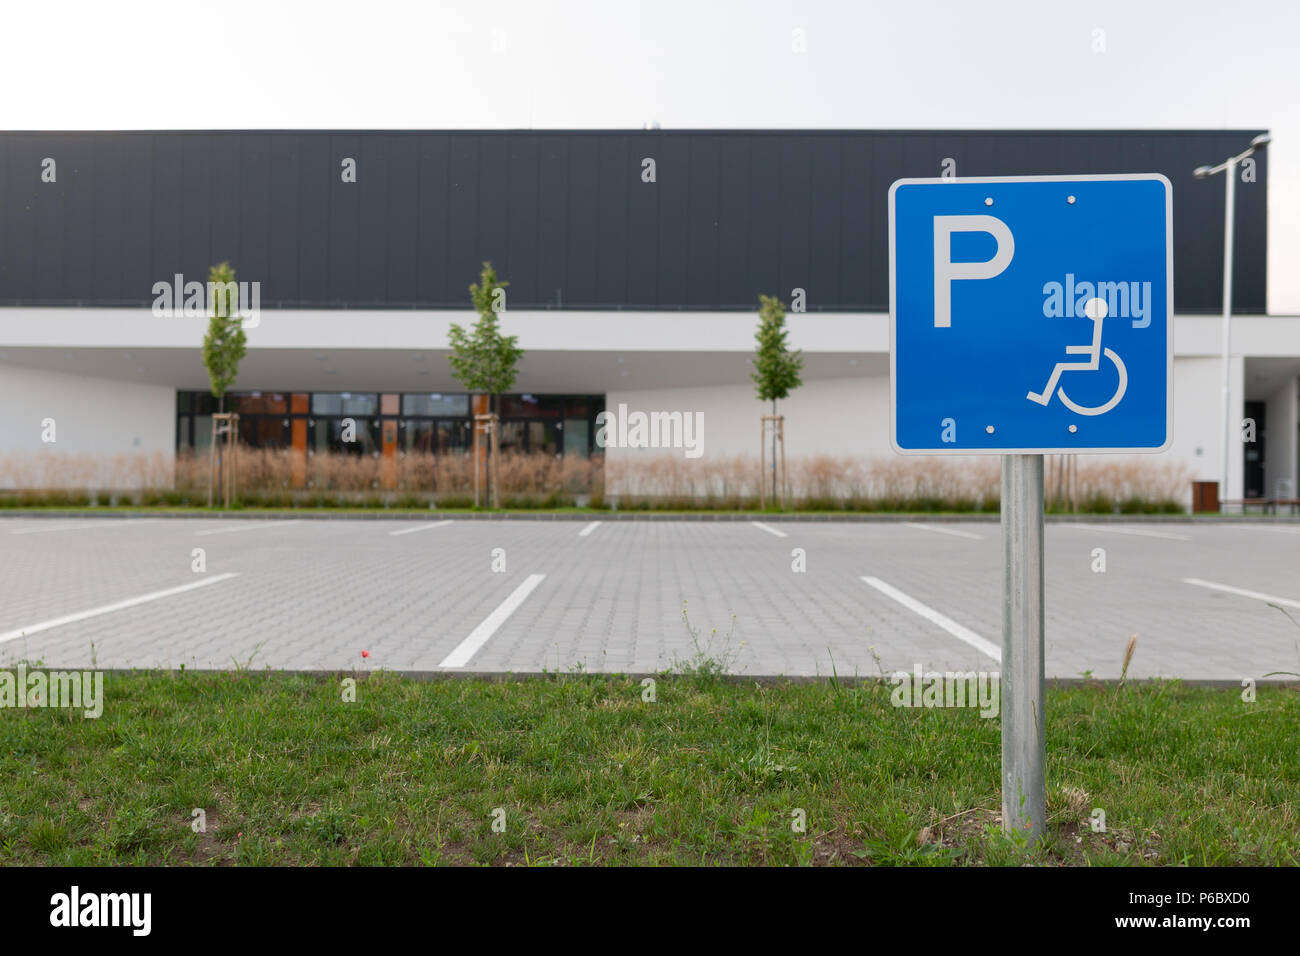 Disabled traffic sign at an empty car park represent handicap parking space without car or people Stock Photo